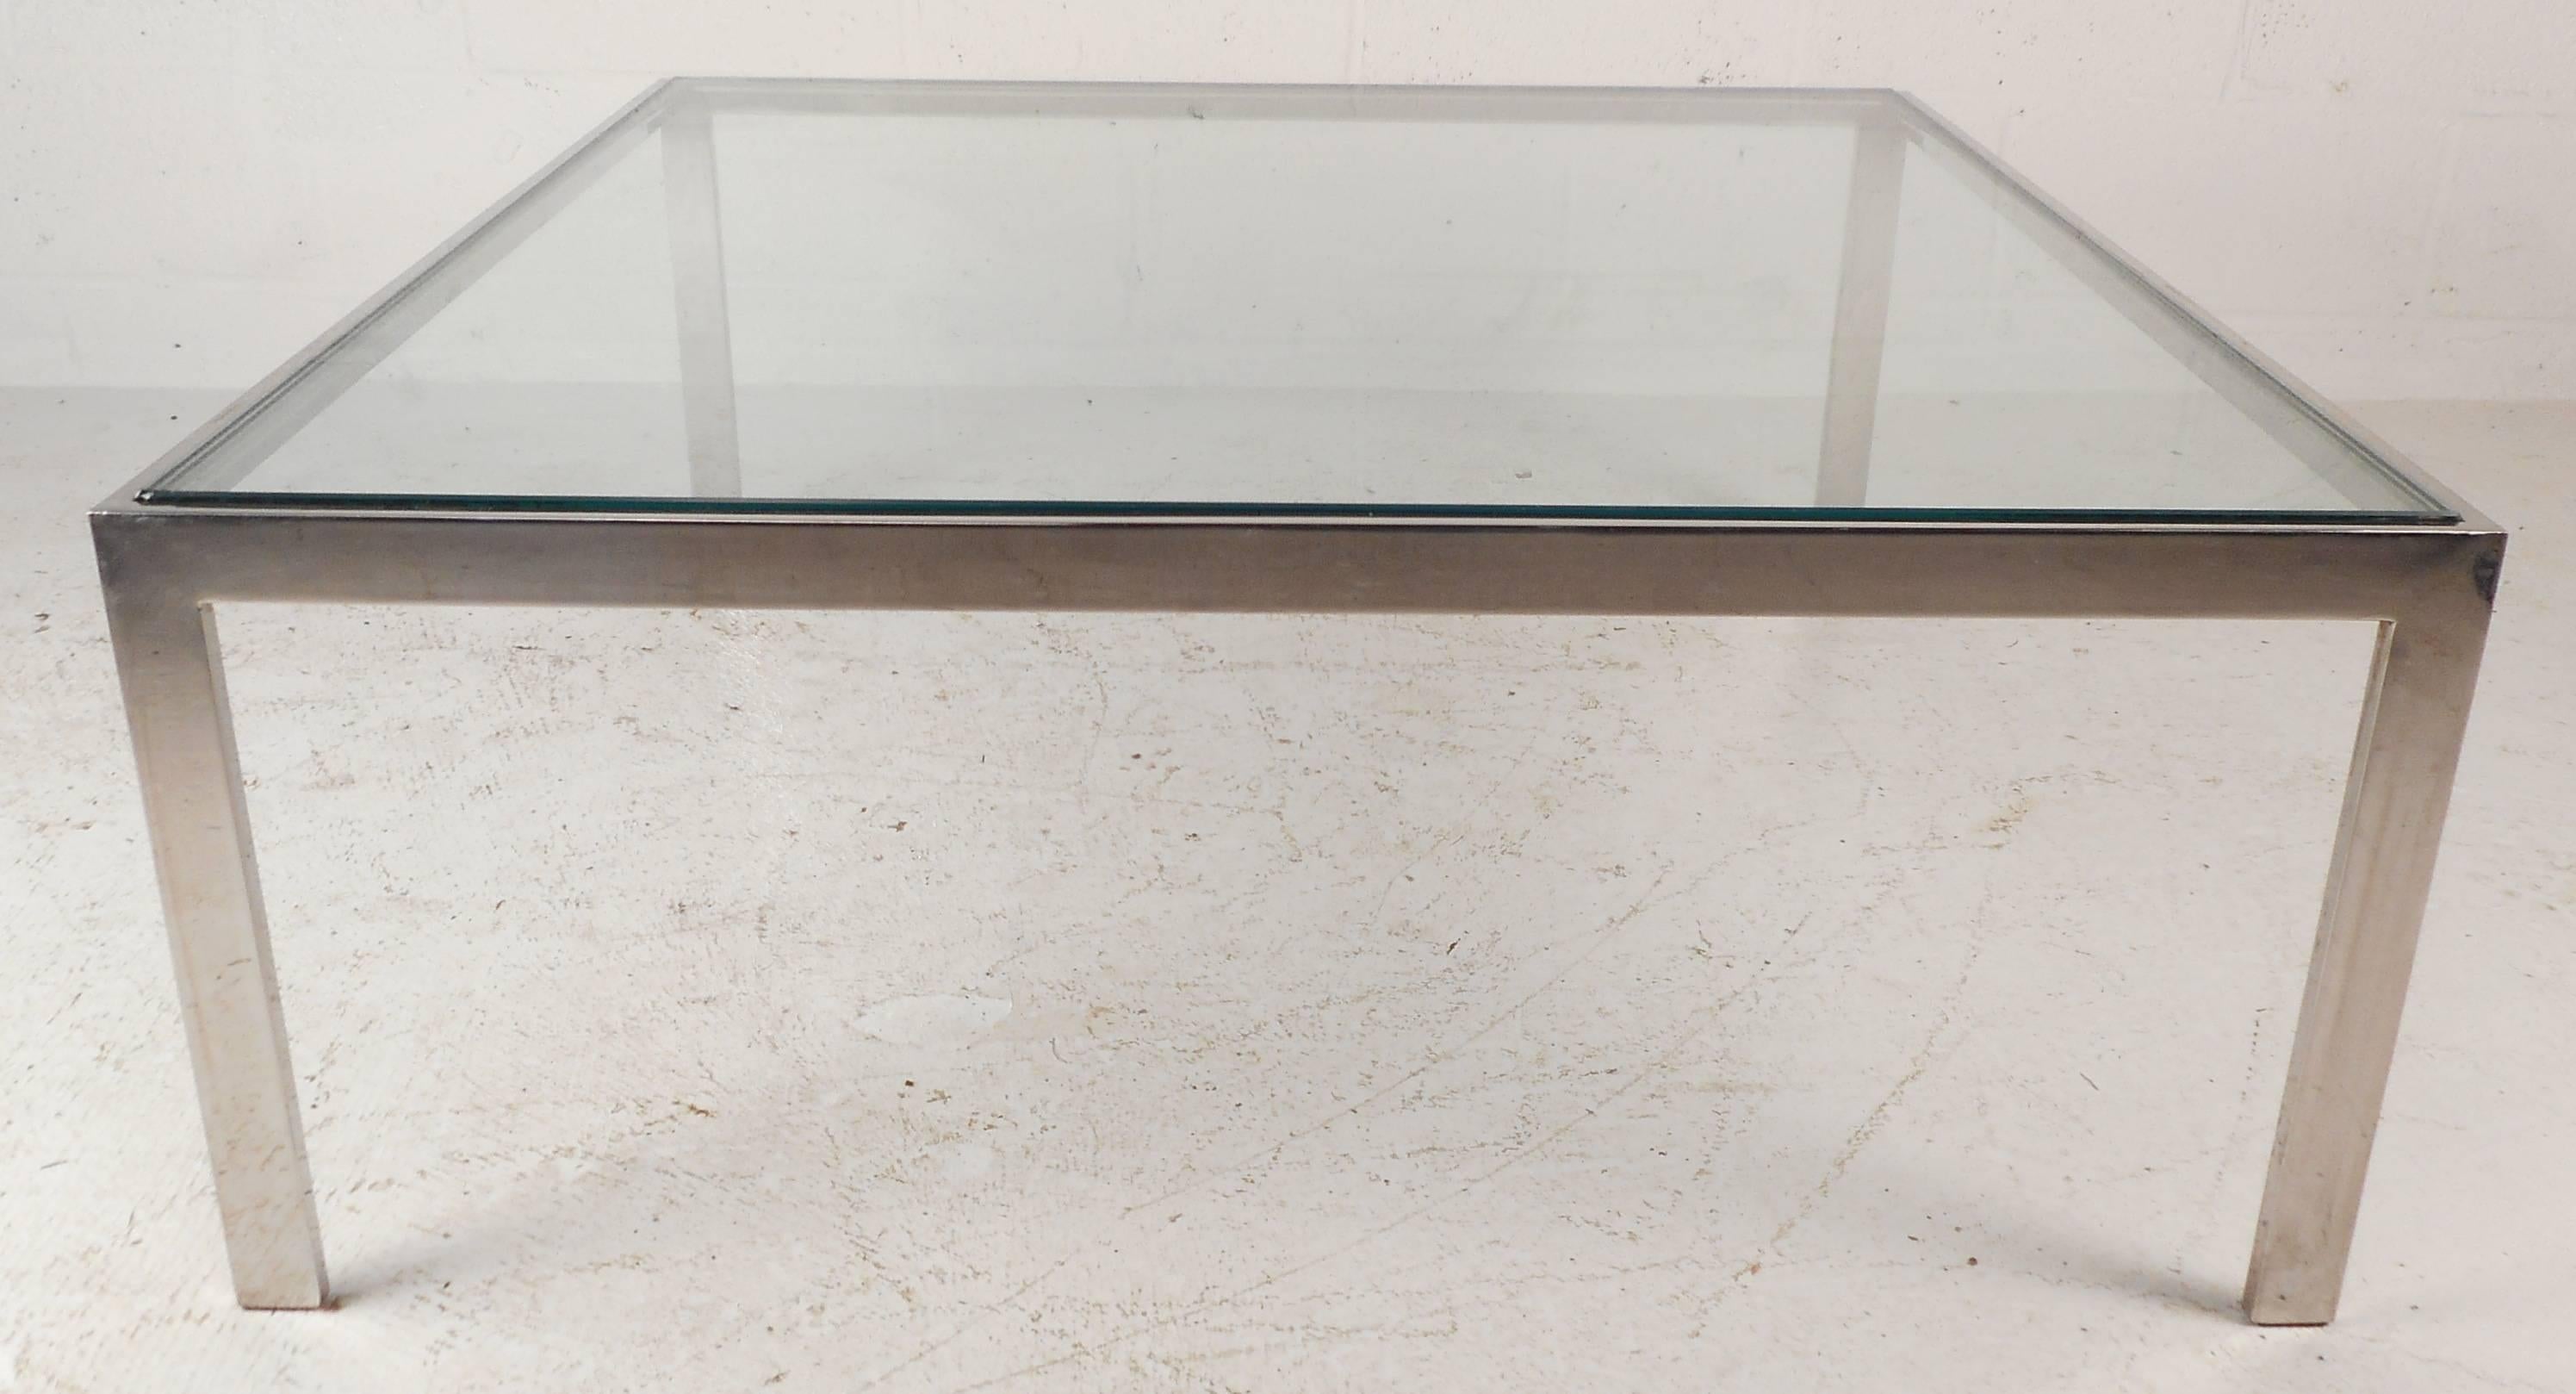 The simple yet elegant lines on this Mid-Century Modern chrome coffee table make a stylish addition to any seating area. Featuring a heavy chrome frame and a thick square glass top, the unique design makes an impressive and sturdy table for any